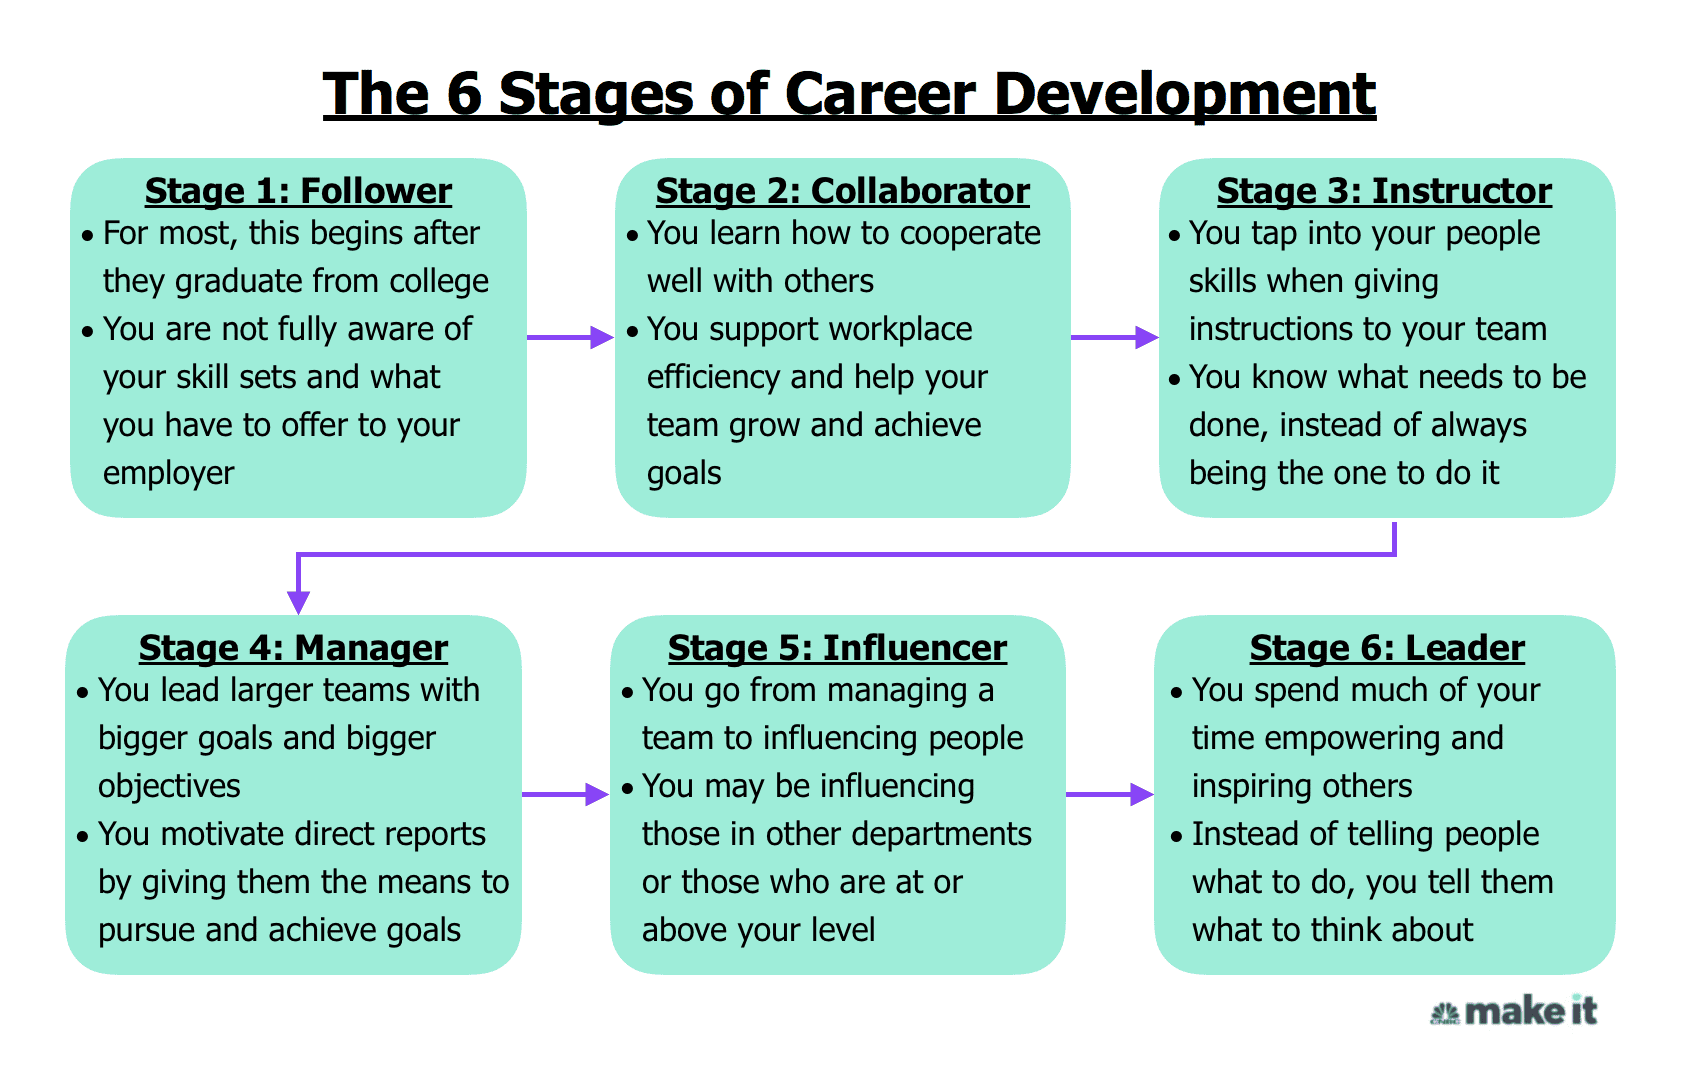 What are the 6 stages of personal development?